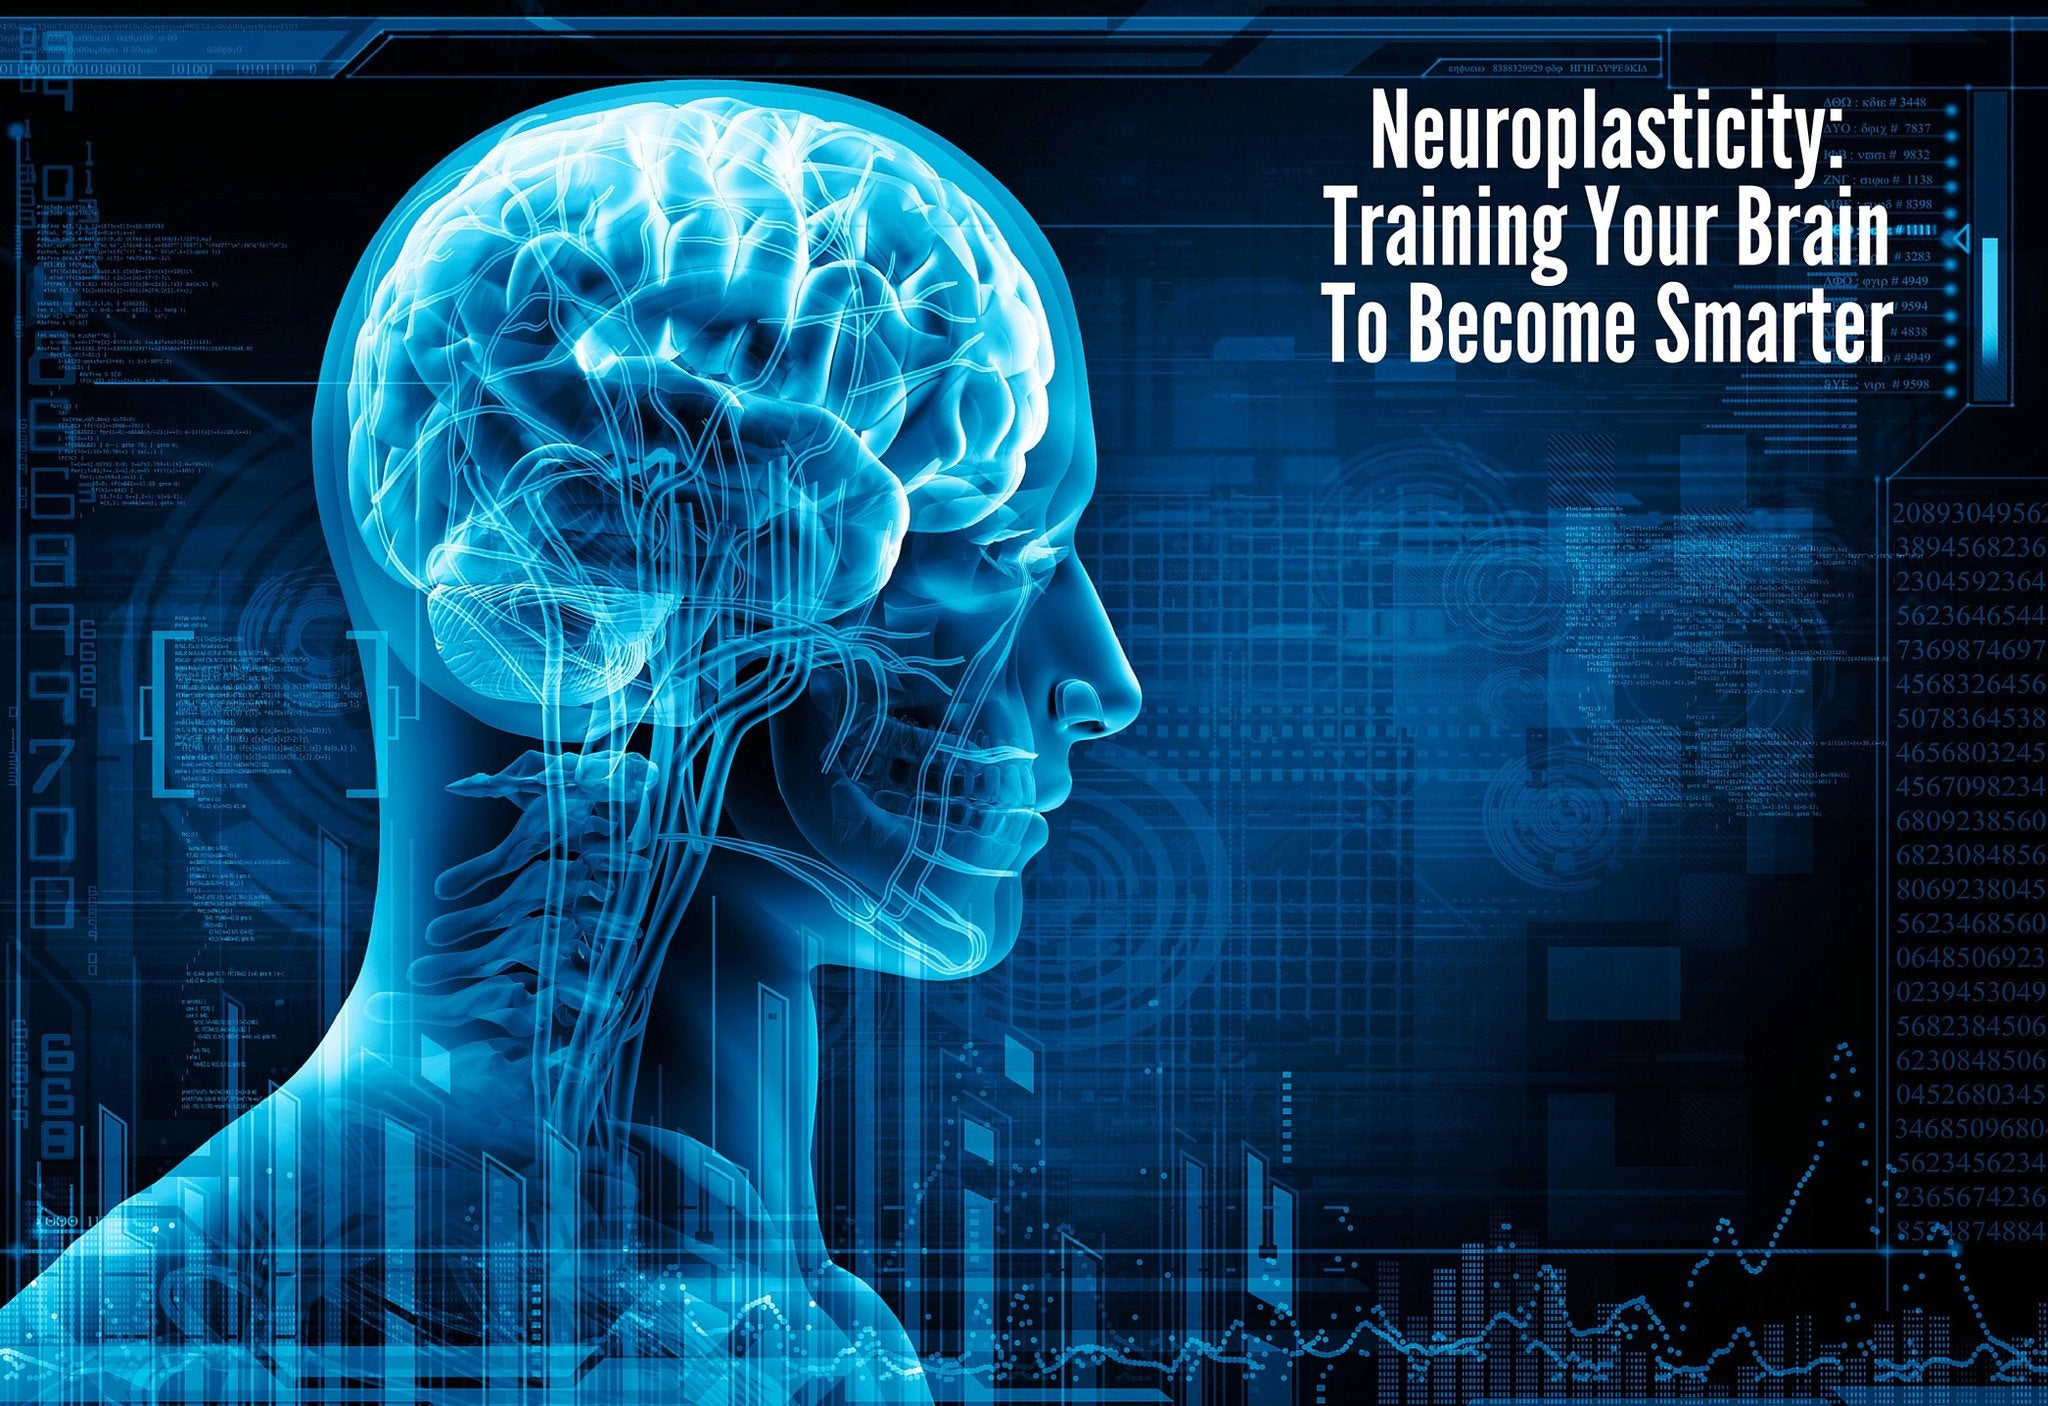 Neuroplasticity: Train Your Brain and Be Smarter